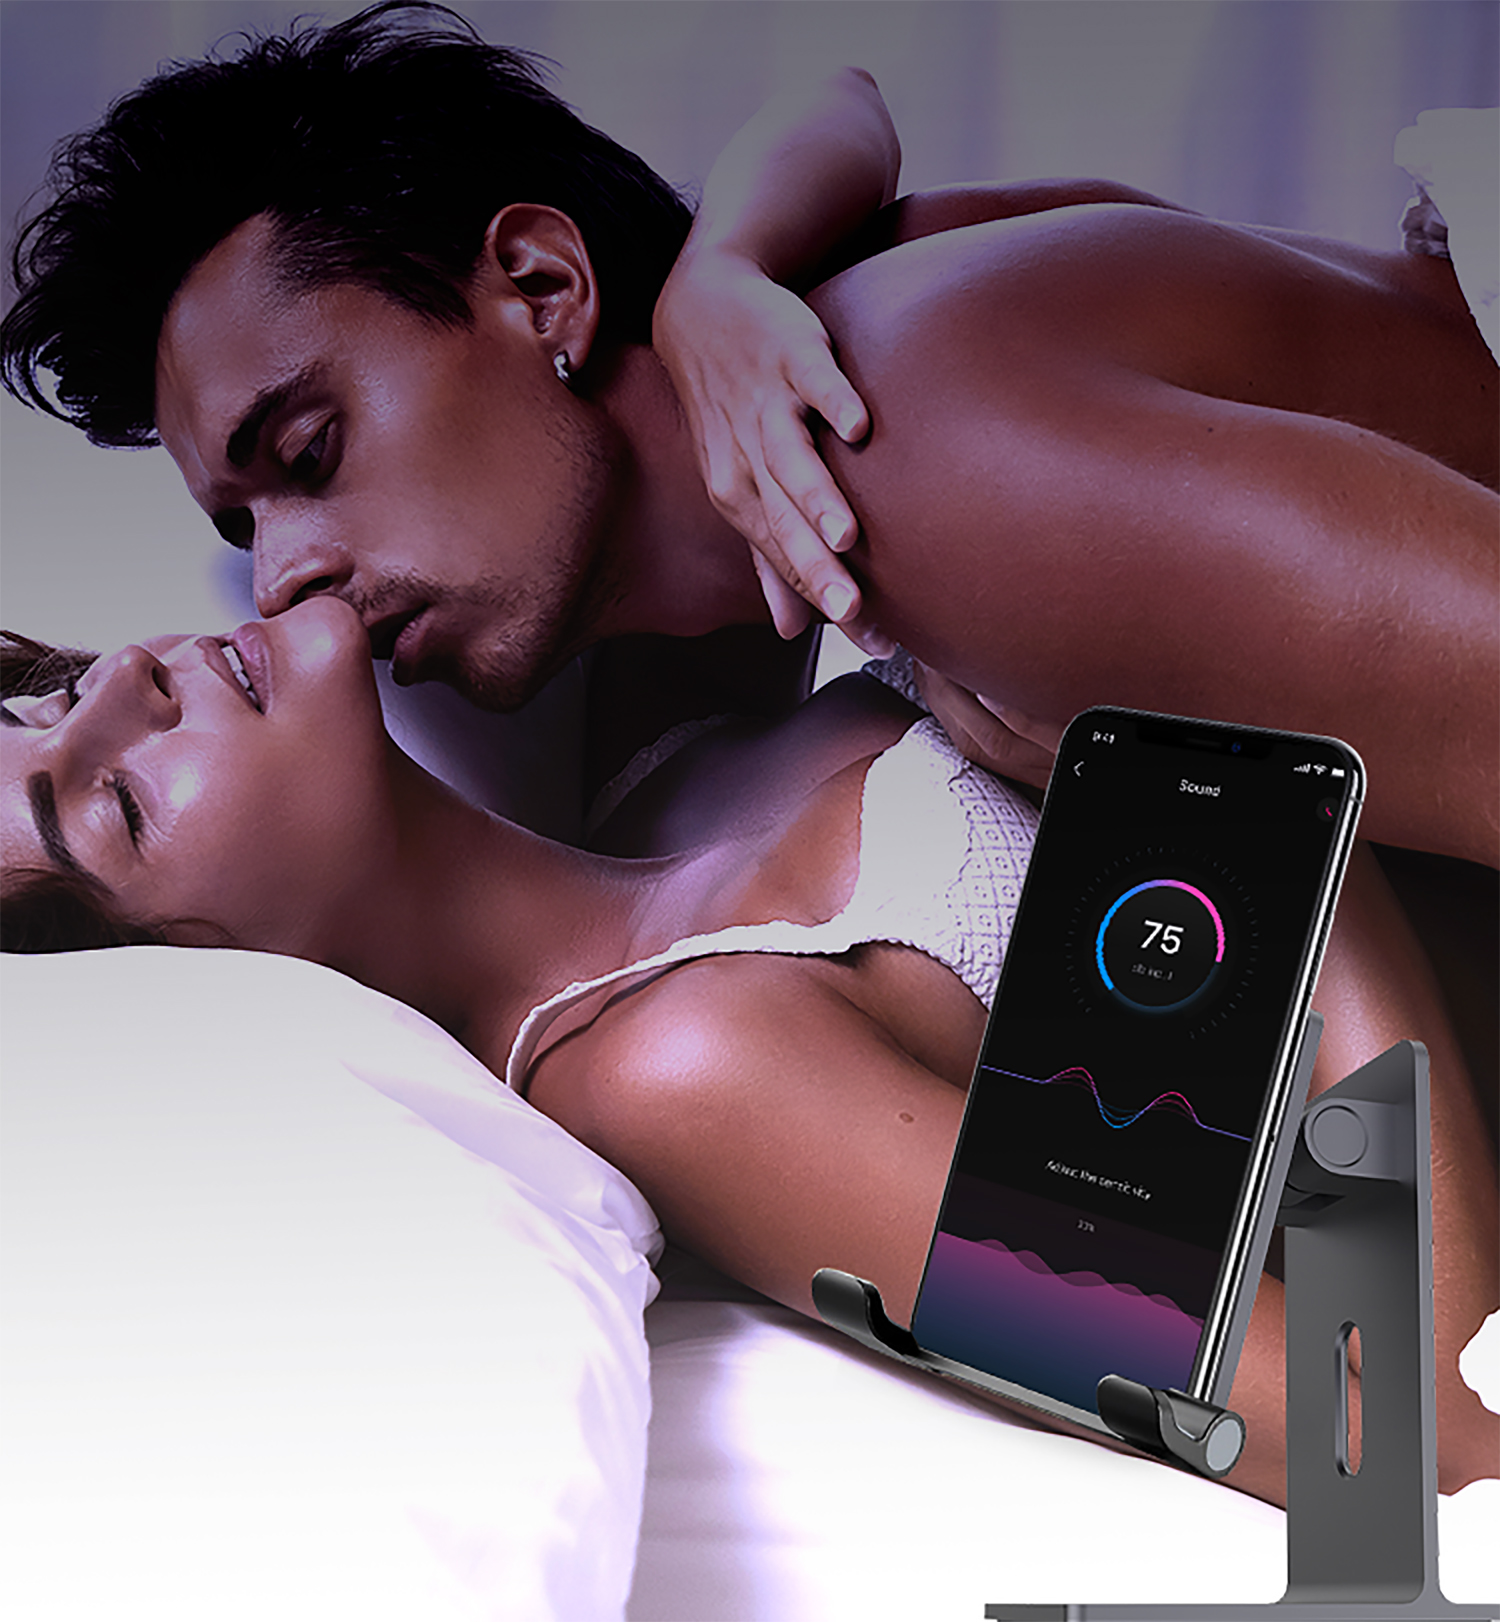 The best sex toy for couples to use together